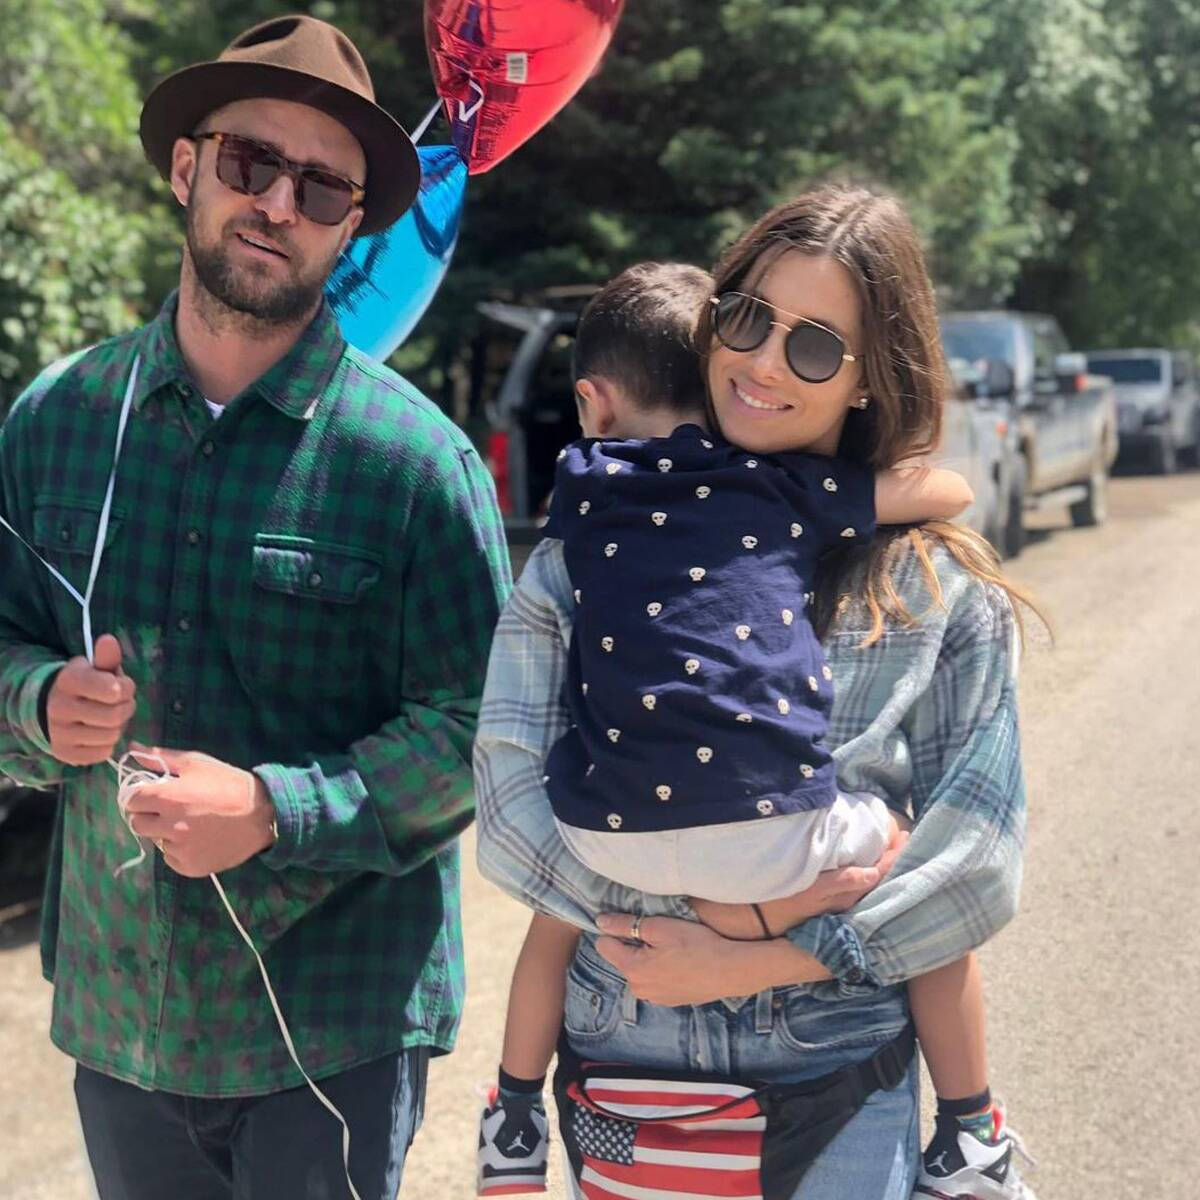 Justin Timberlake Says He and Jessica Biel Want to Avoid Being "Weirdly Private" About Their Kids